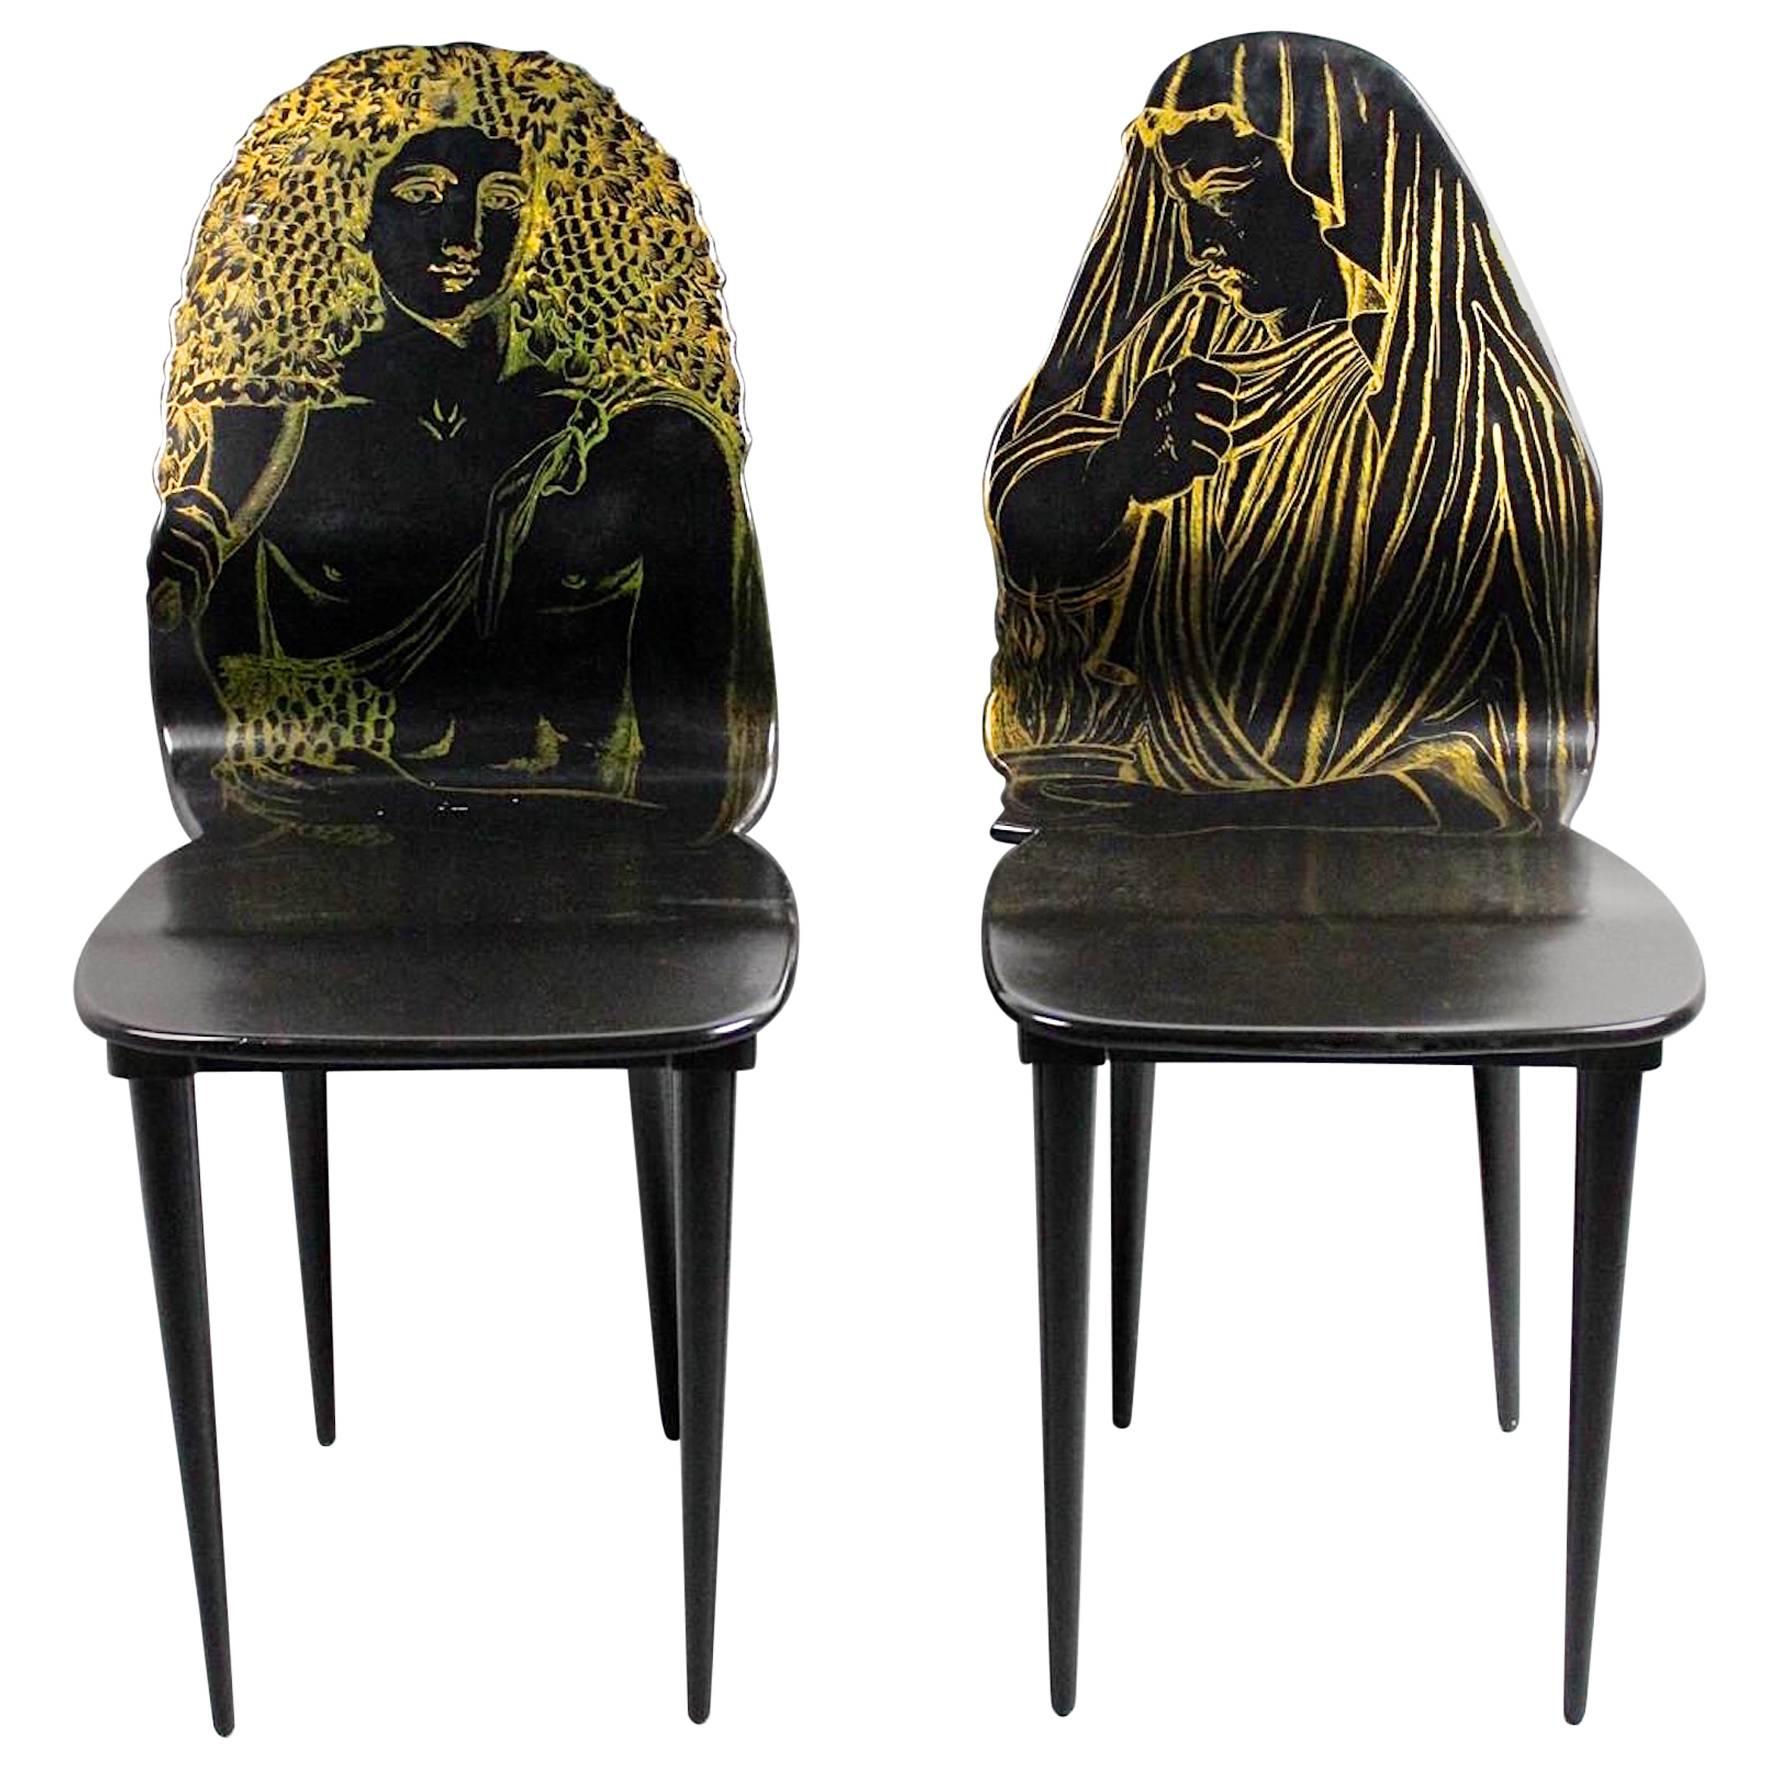 Pair of Fornasetti "Quattro Stagione" Chairs Inverno and Autunno